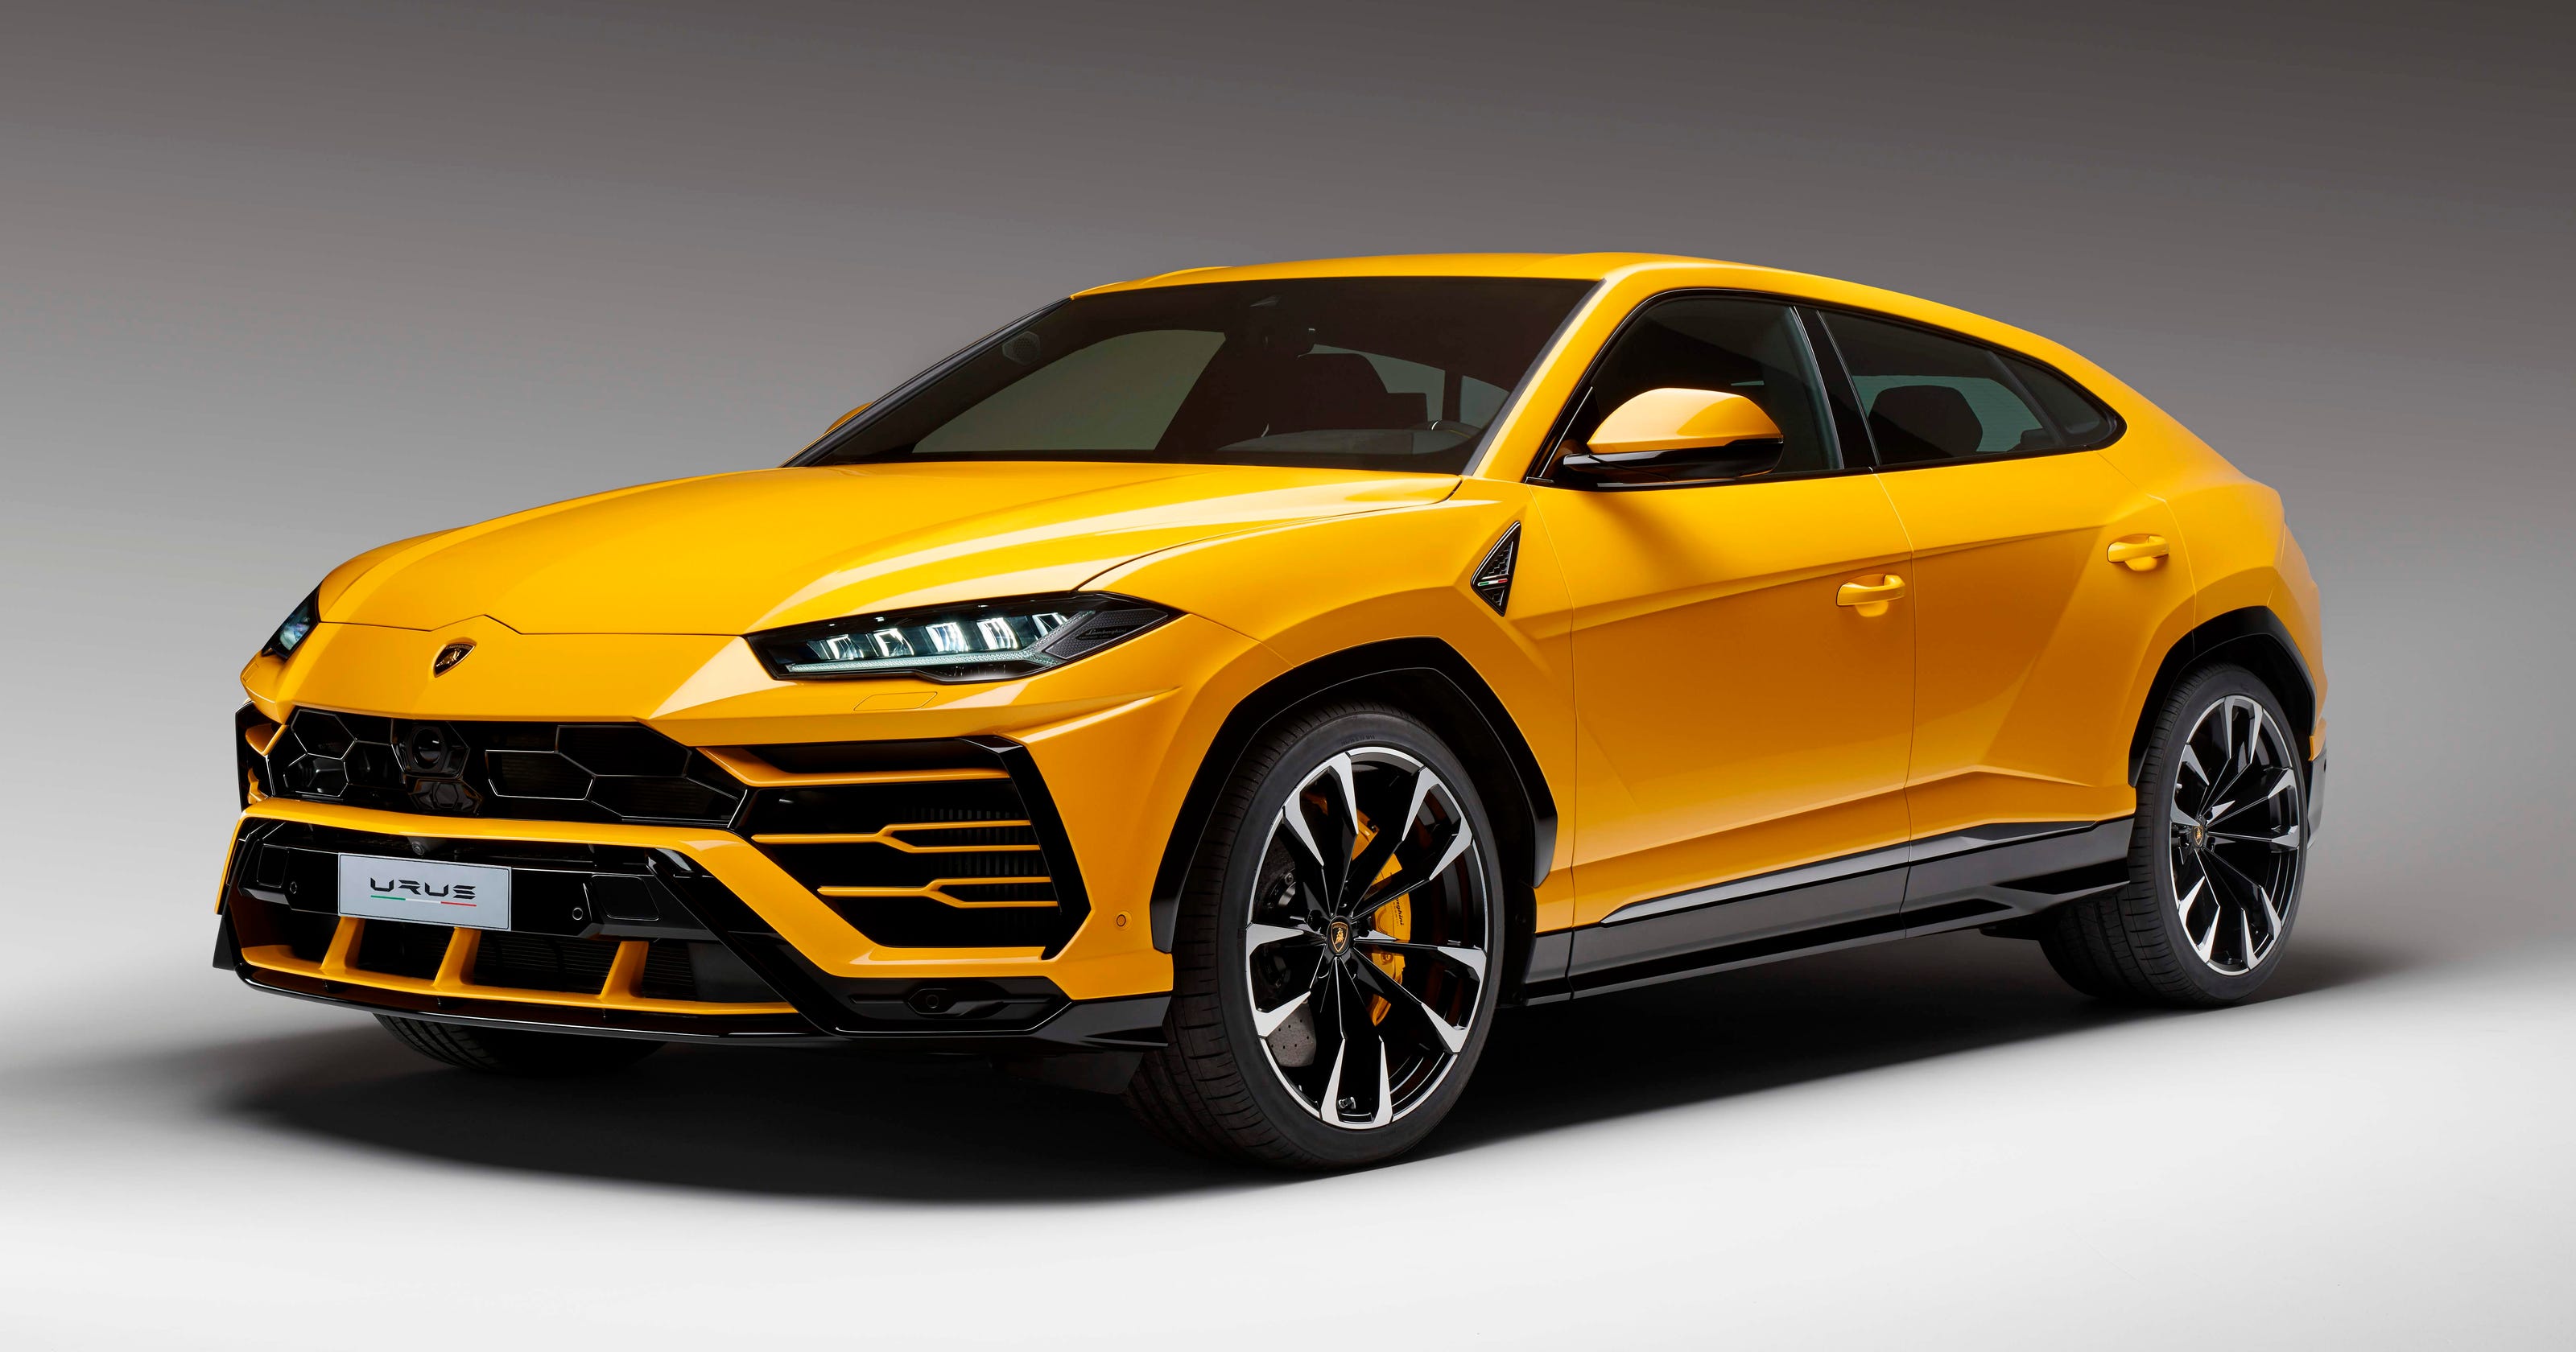 Urus SUV joins the boom in supercar SUVs